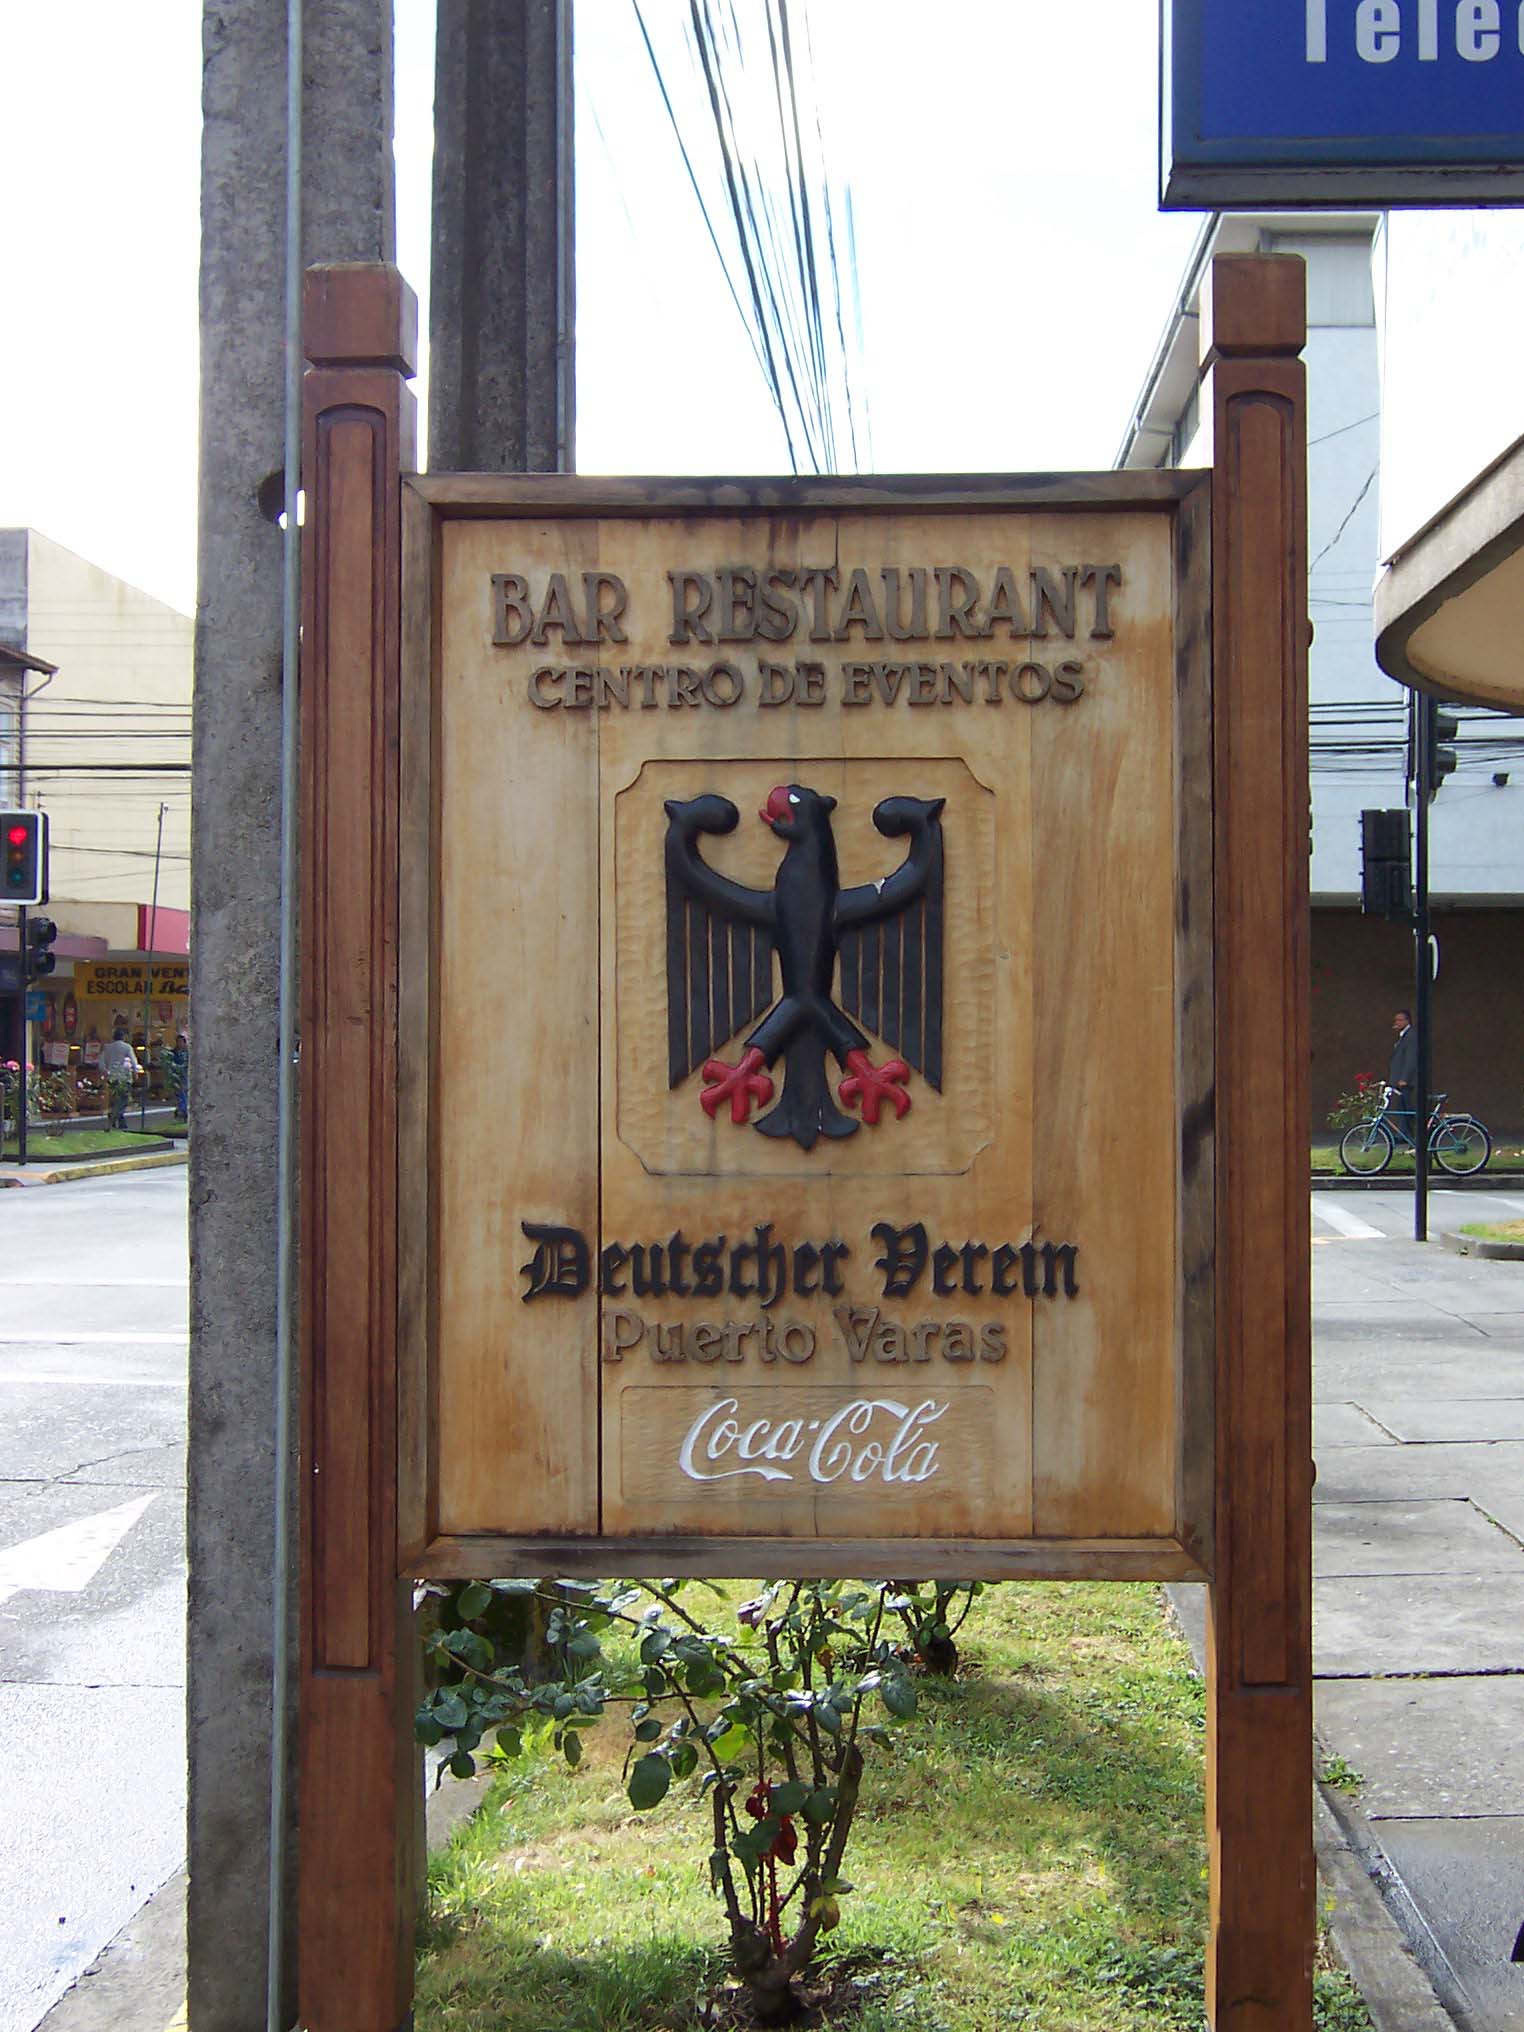 Wood-carved street sign beckoning diners to the Club Alemán's bar and restaurant. The German eagle greets Atlanta's global beverage in South America